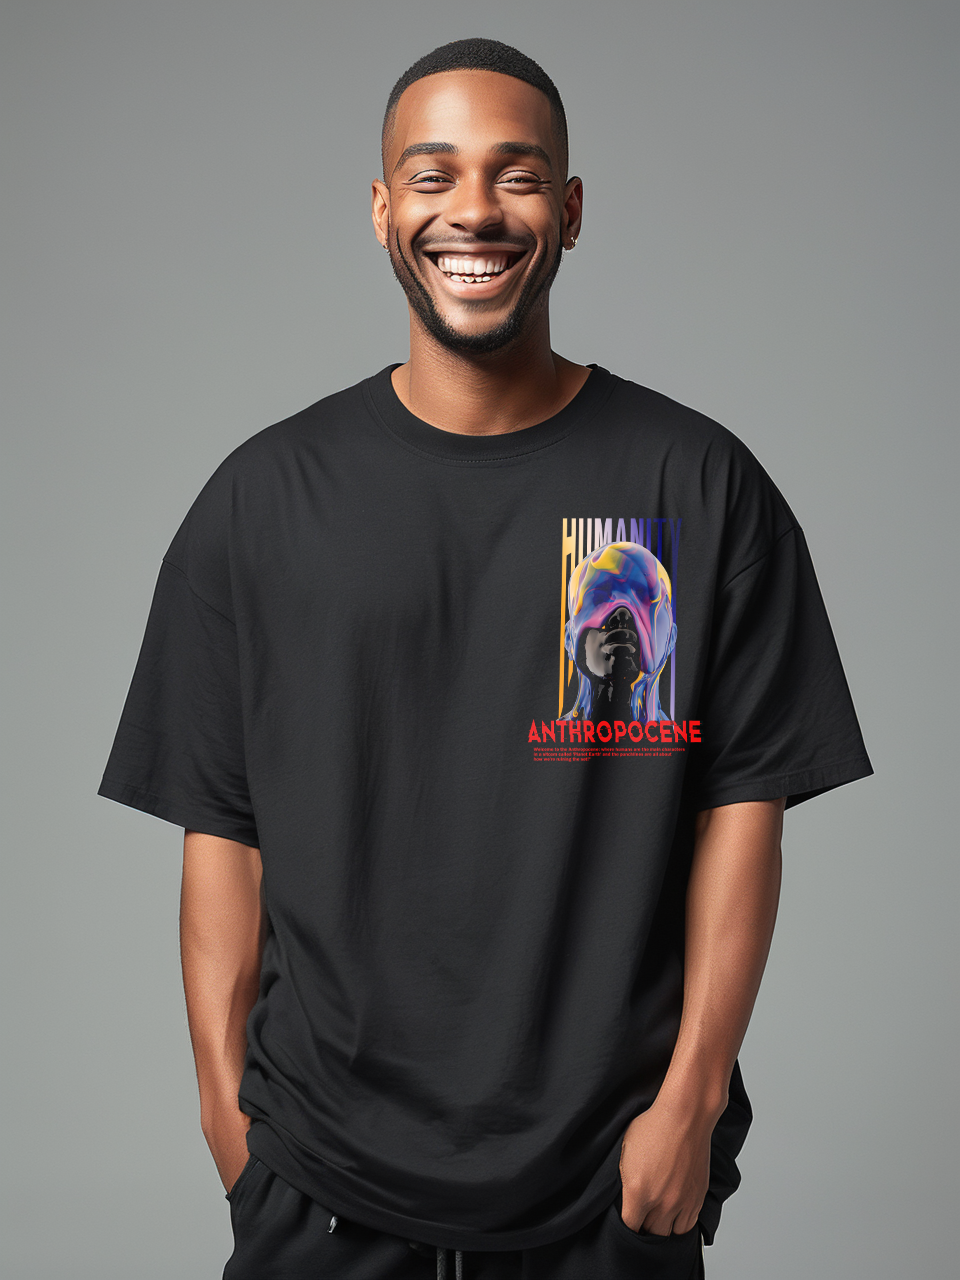 Humanity oversize T-shirt, front side